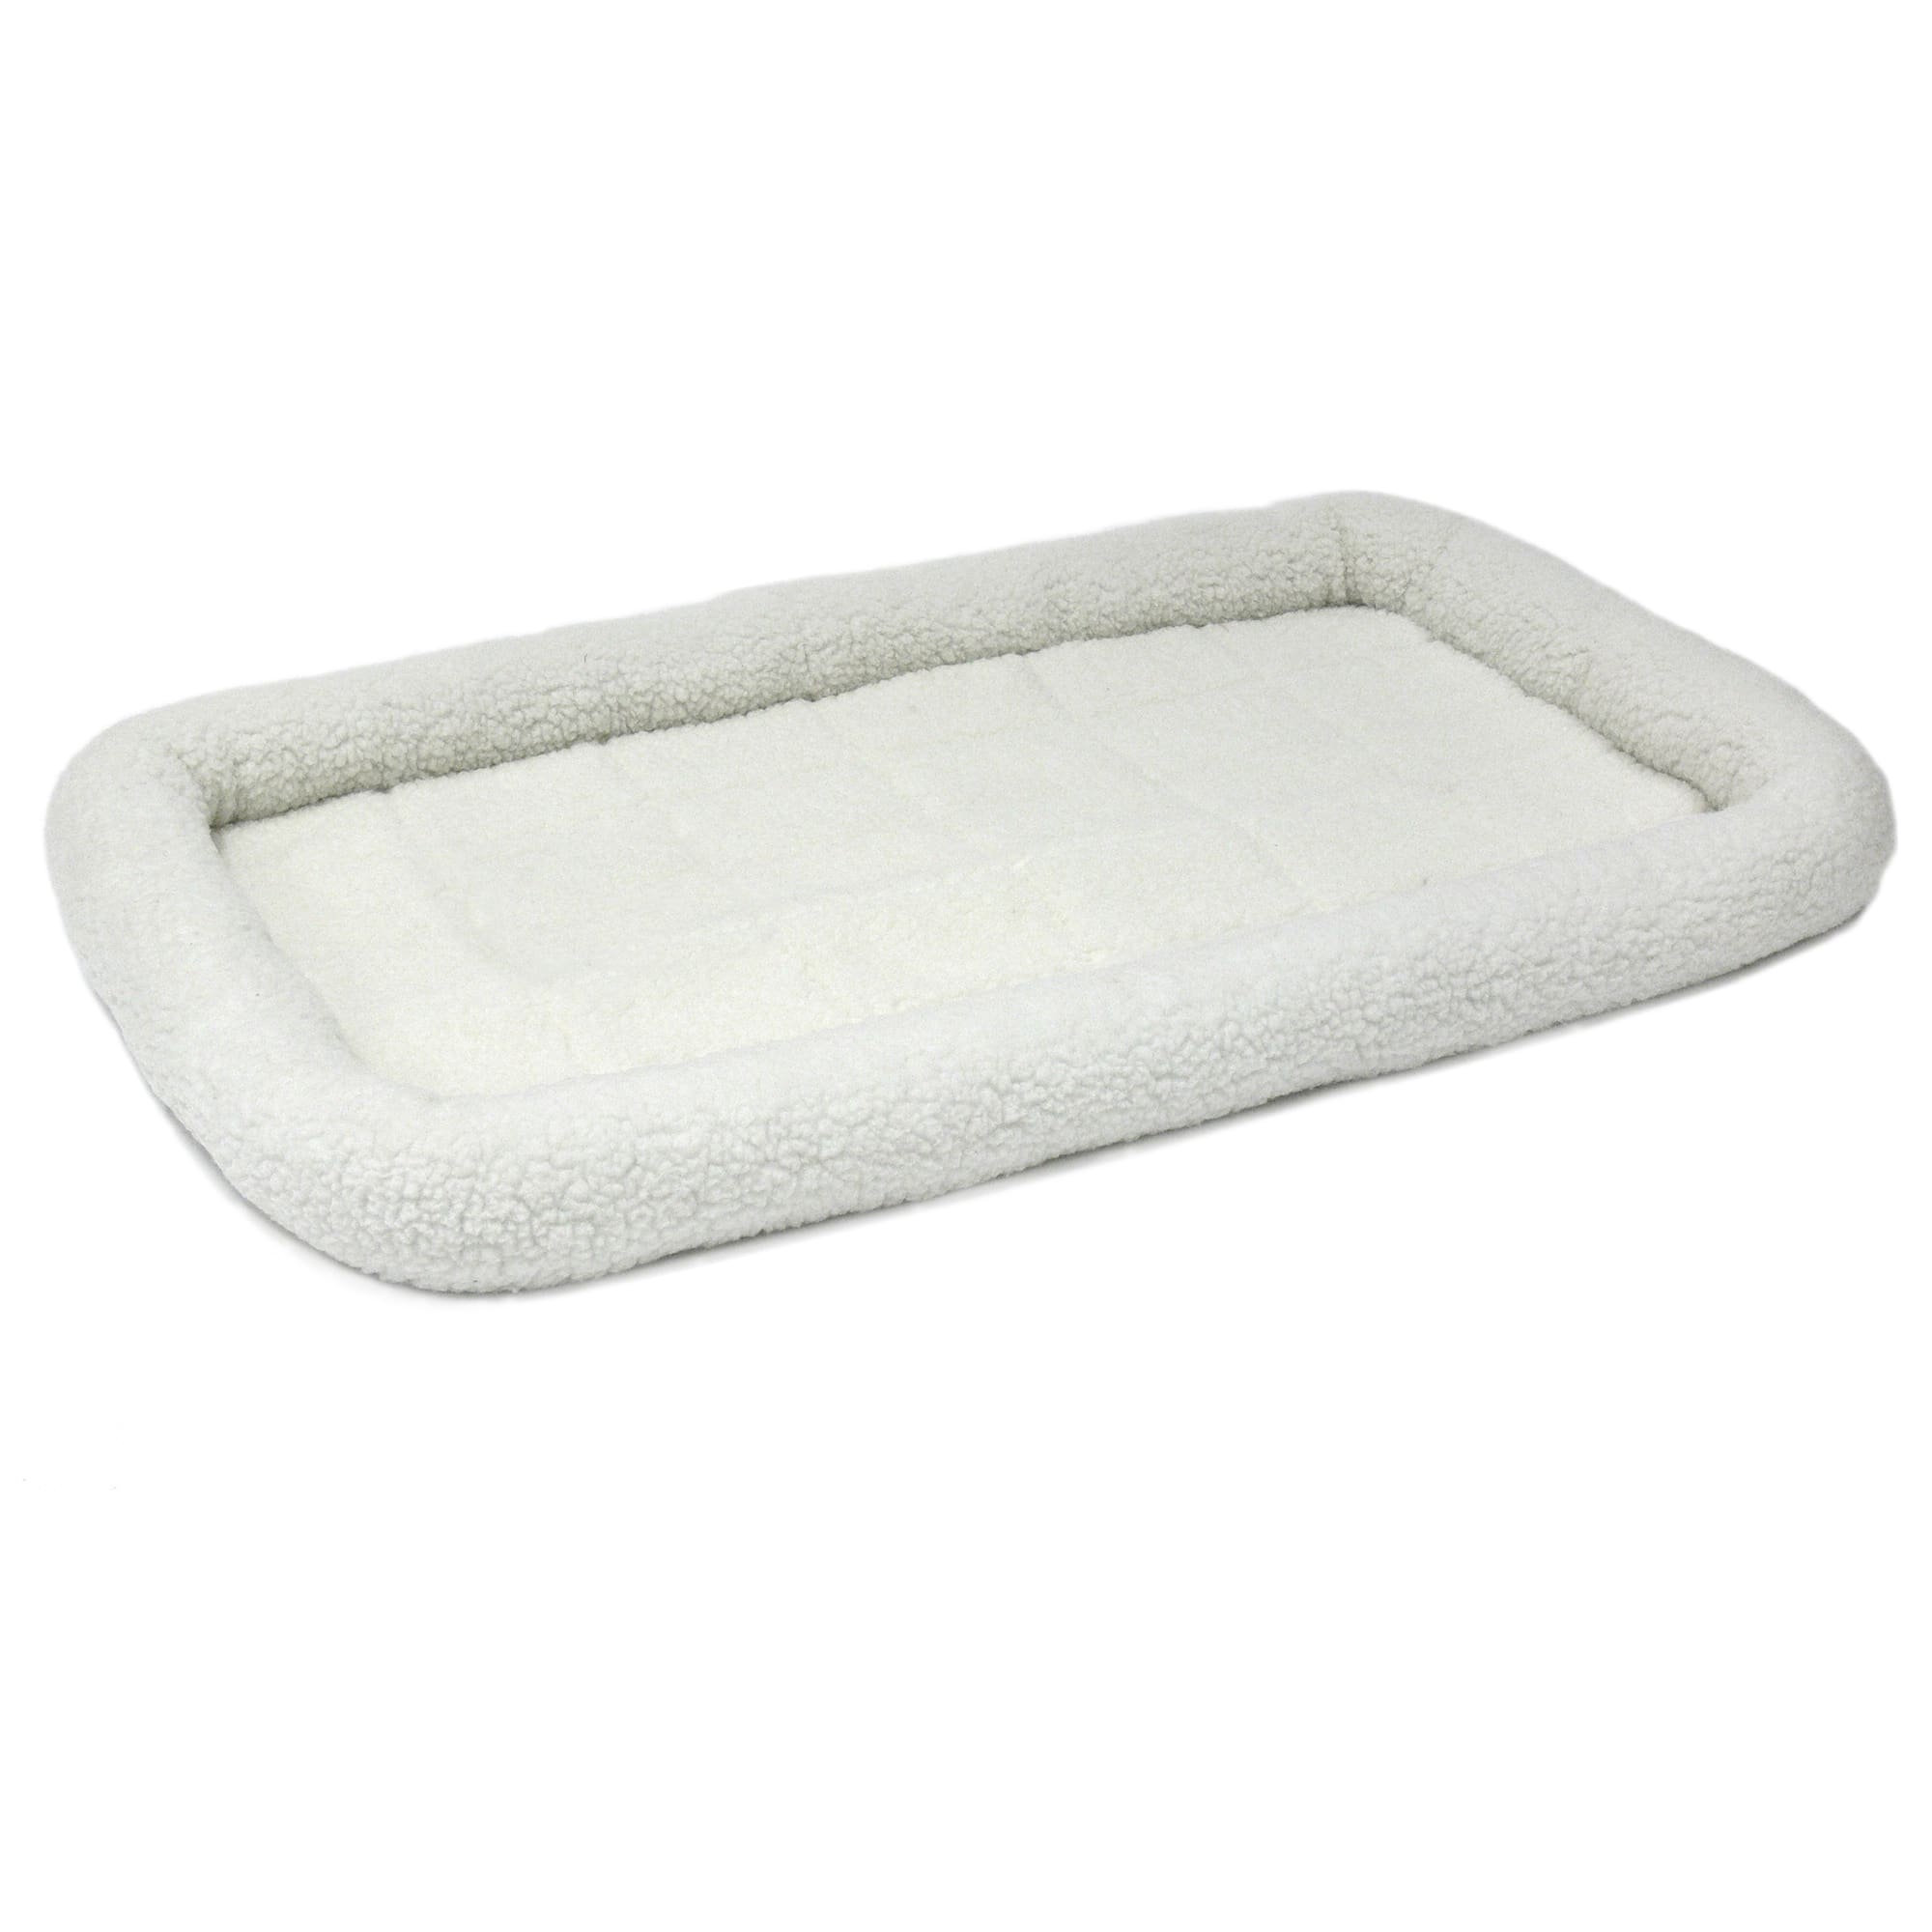 Photos - Bed & Furniture Midwest Quiet Time Bolster White Dog Bed, 48" L X 30" W, XX-Large, 